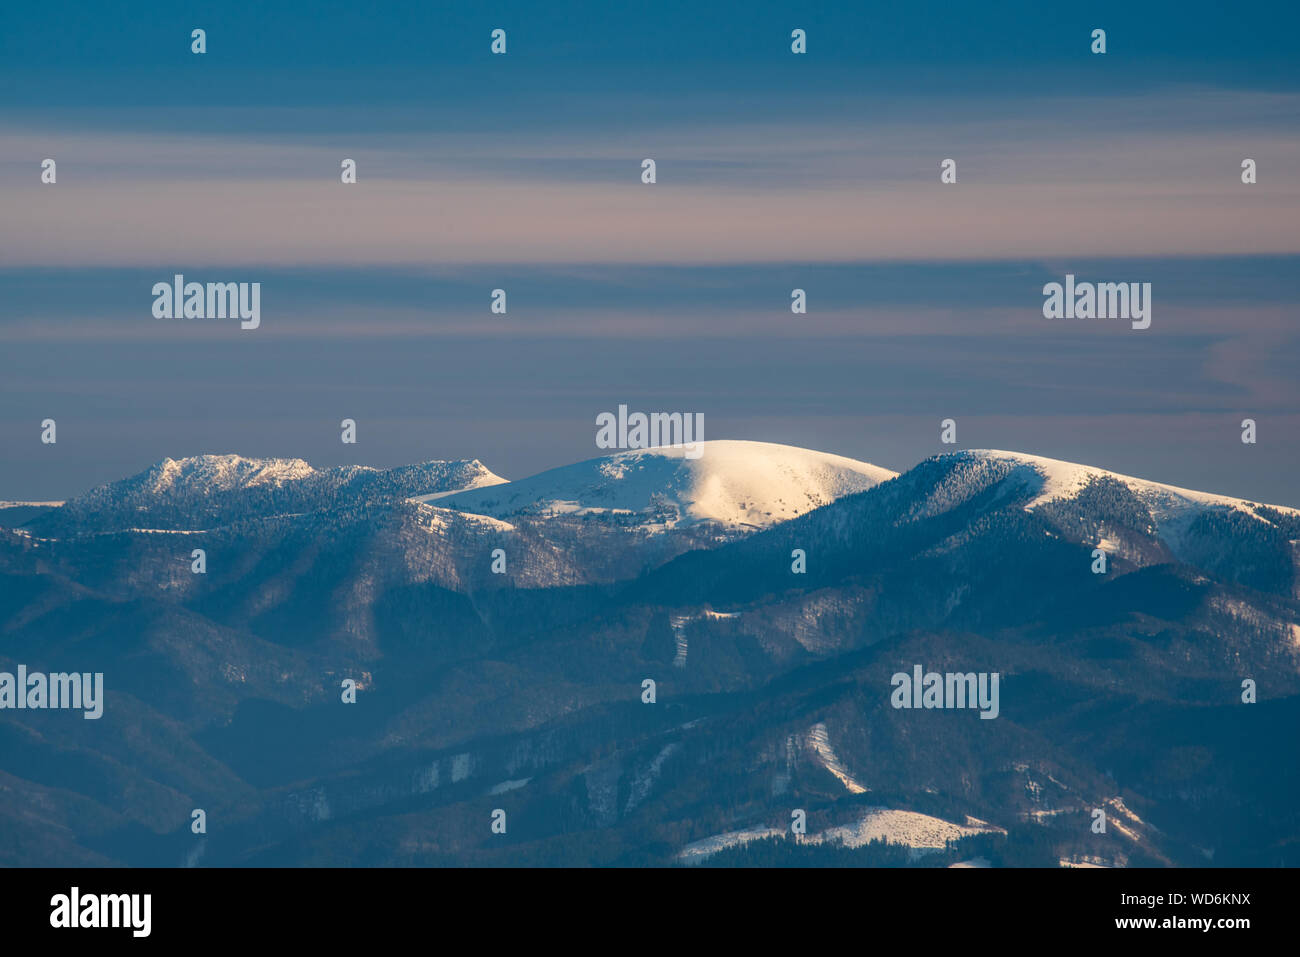 view to Cierny kamen, Ploska and Borisov hills from Martinske hole in Mala Fatra mountains in Slovakia during winter day with blue sky Stock Photo